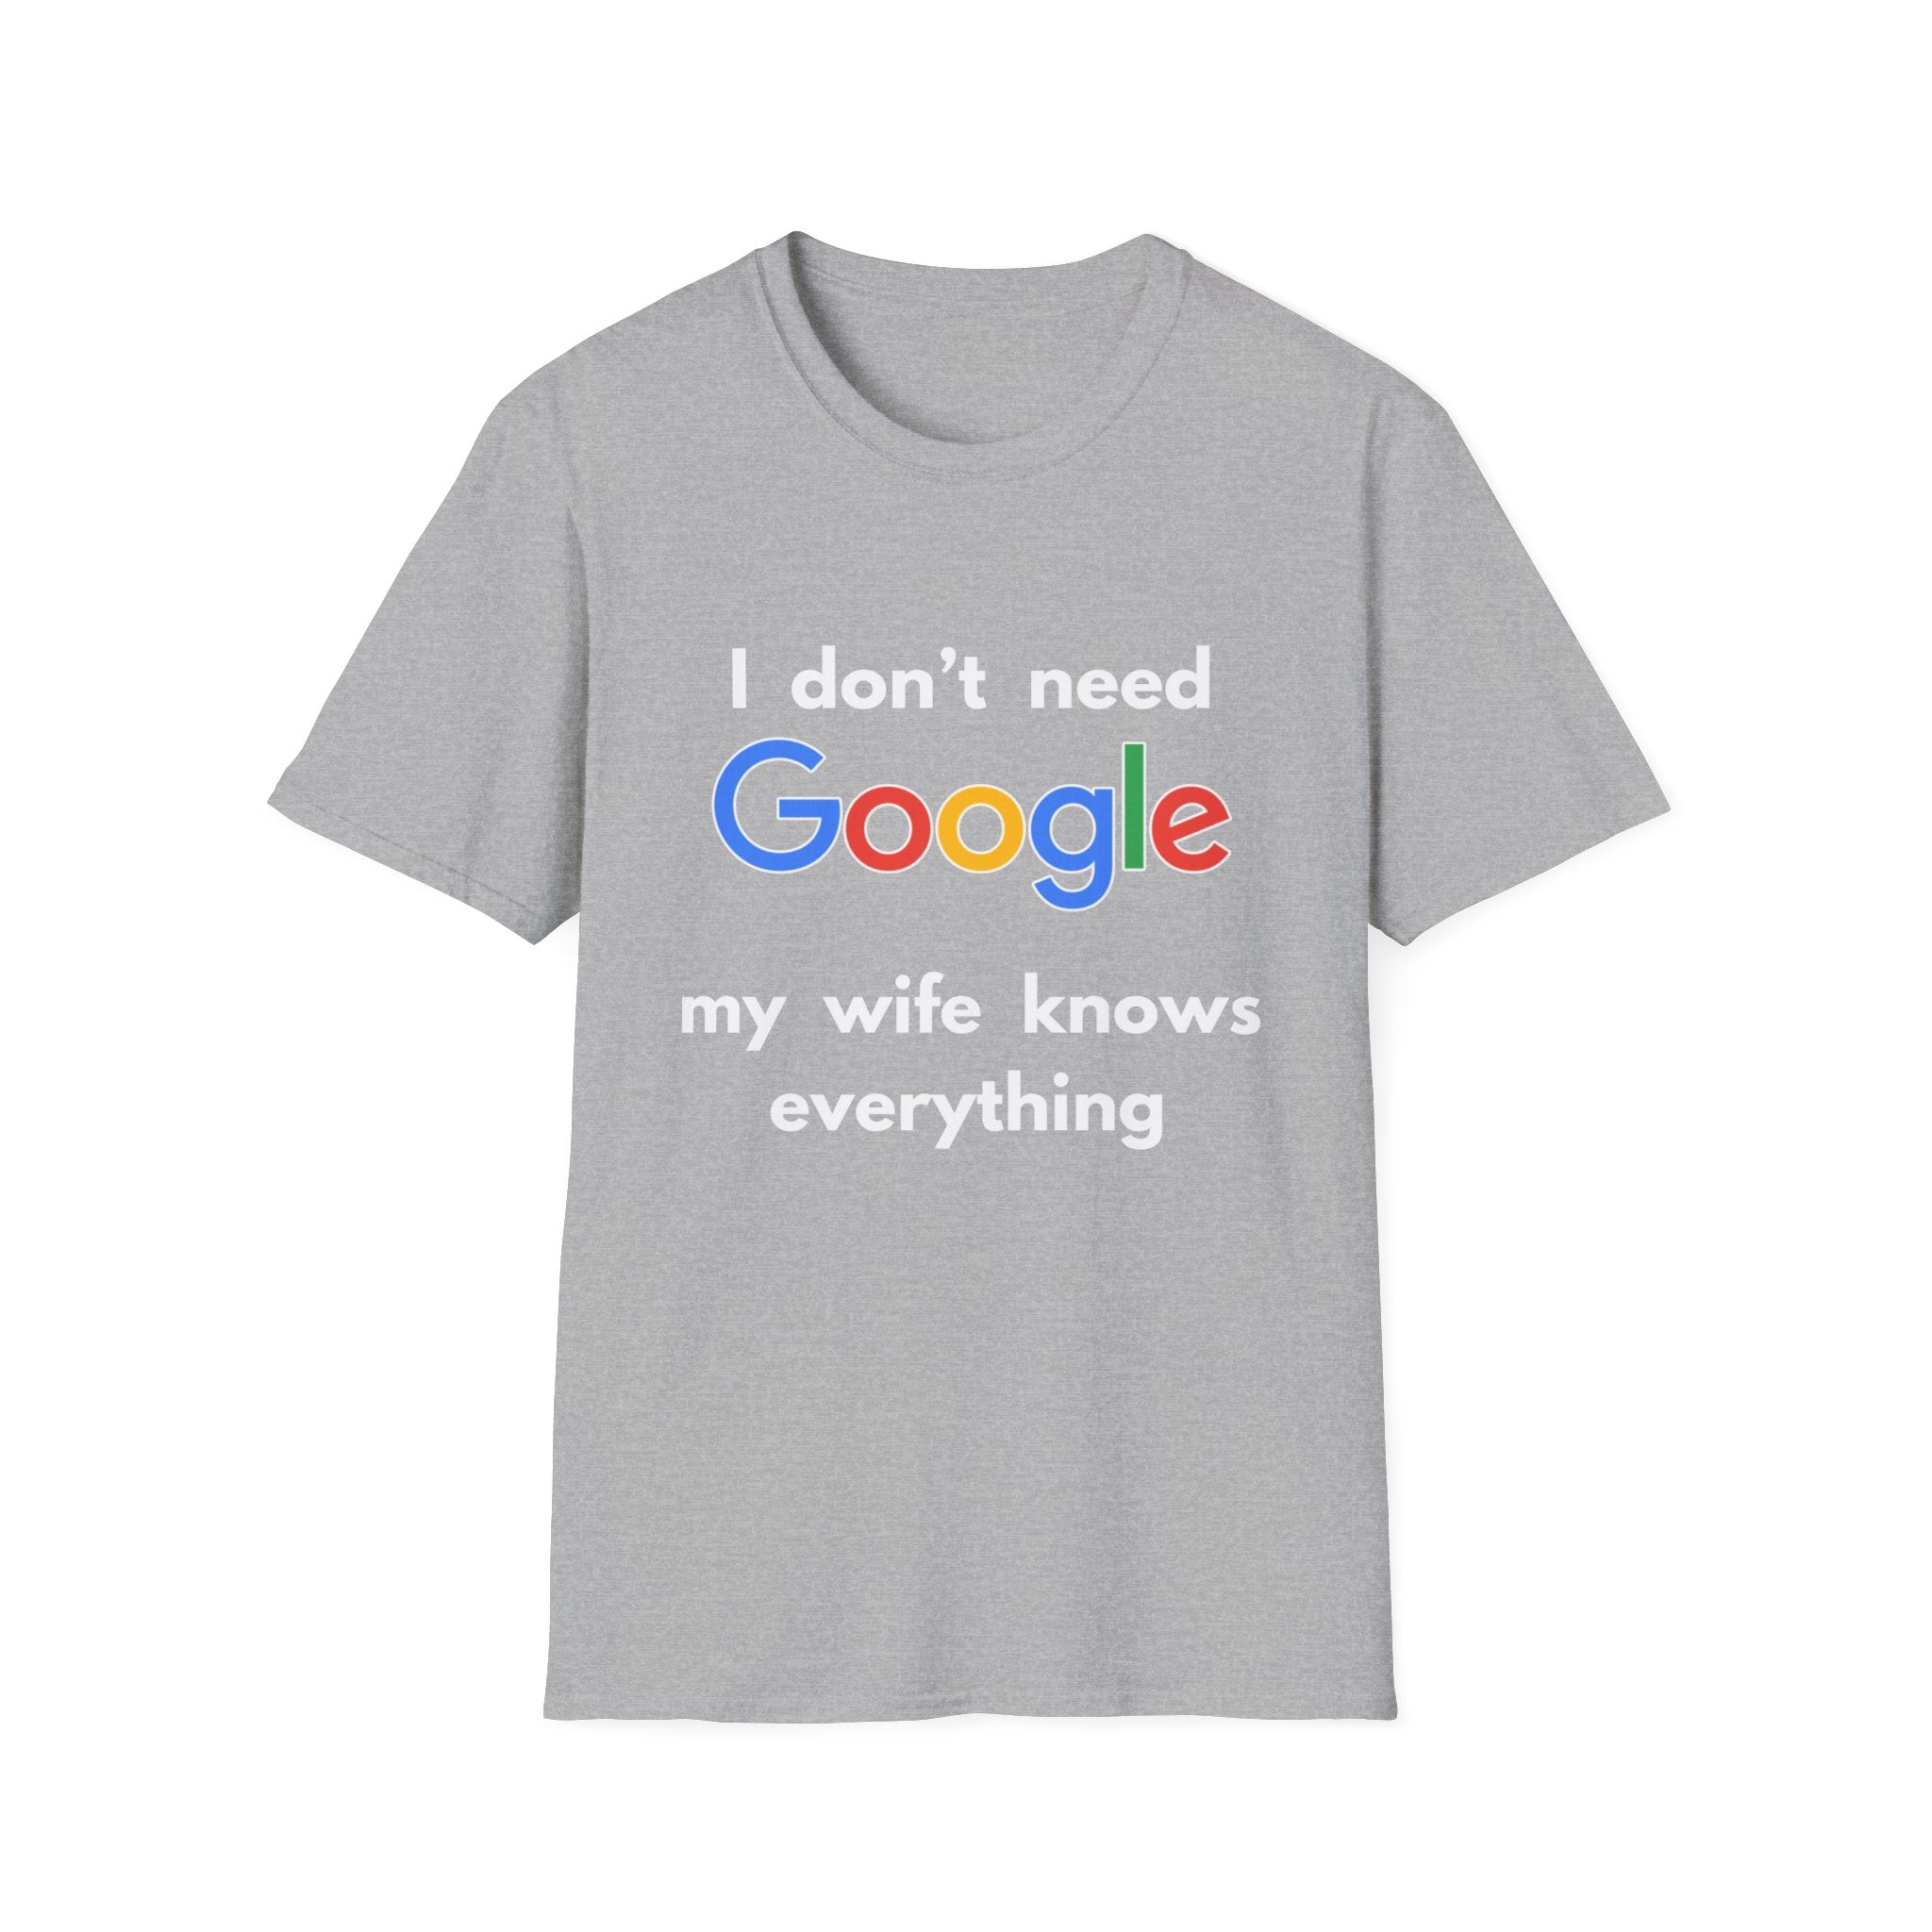 My Wife Knows Everything T-Shirt